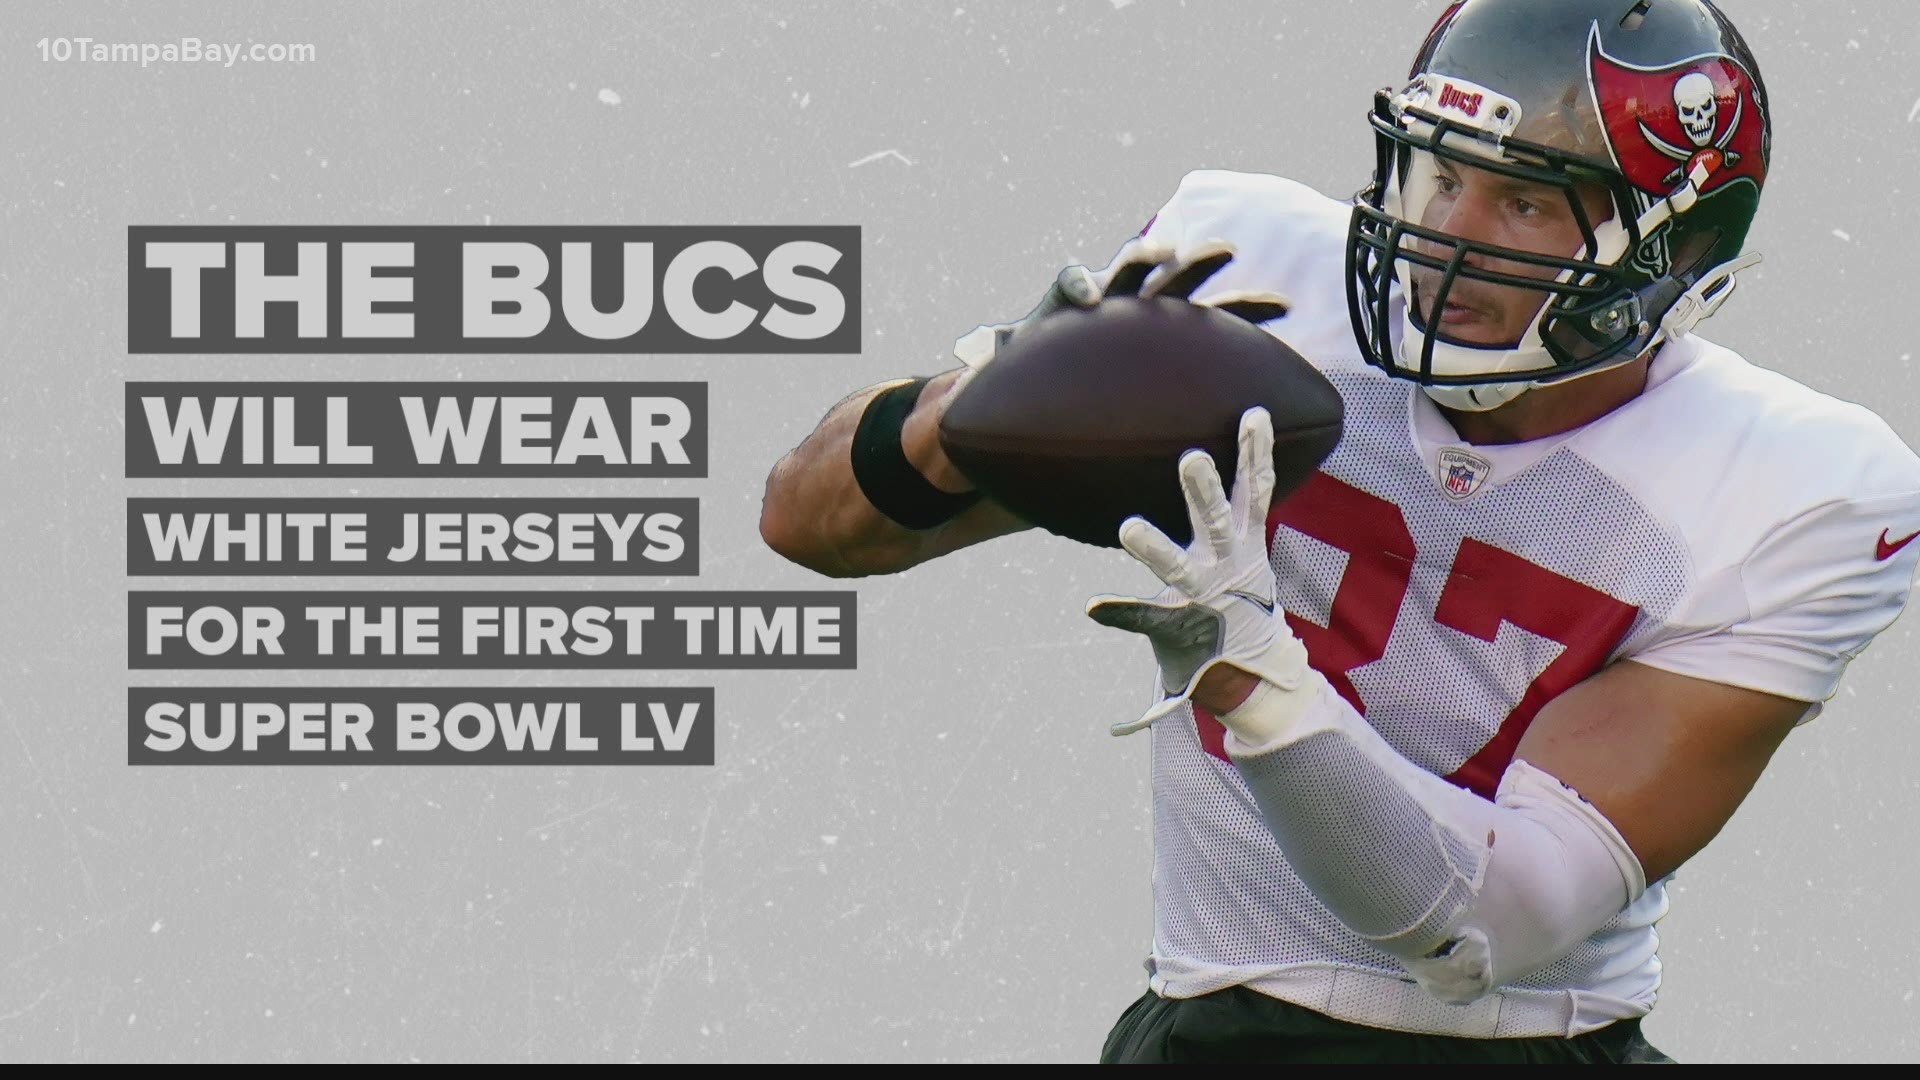 What uniform will the Bucs wear for Super Bowl LV?